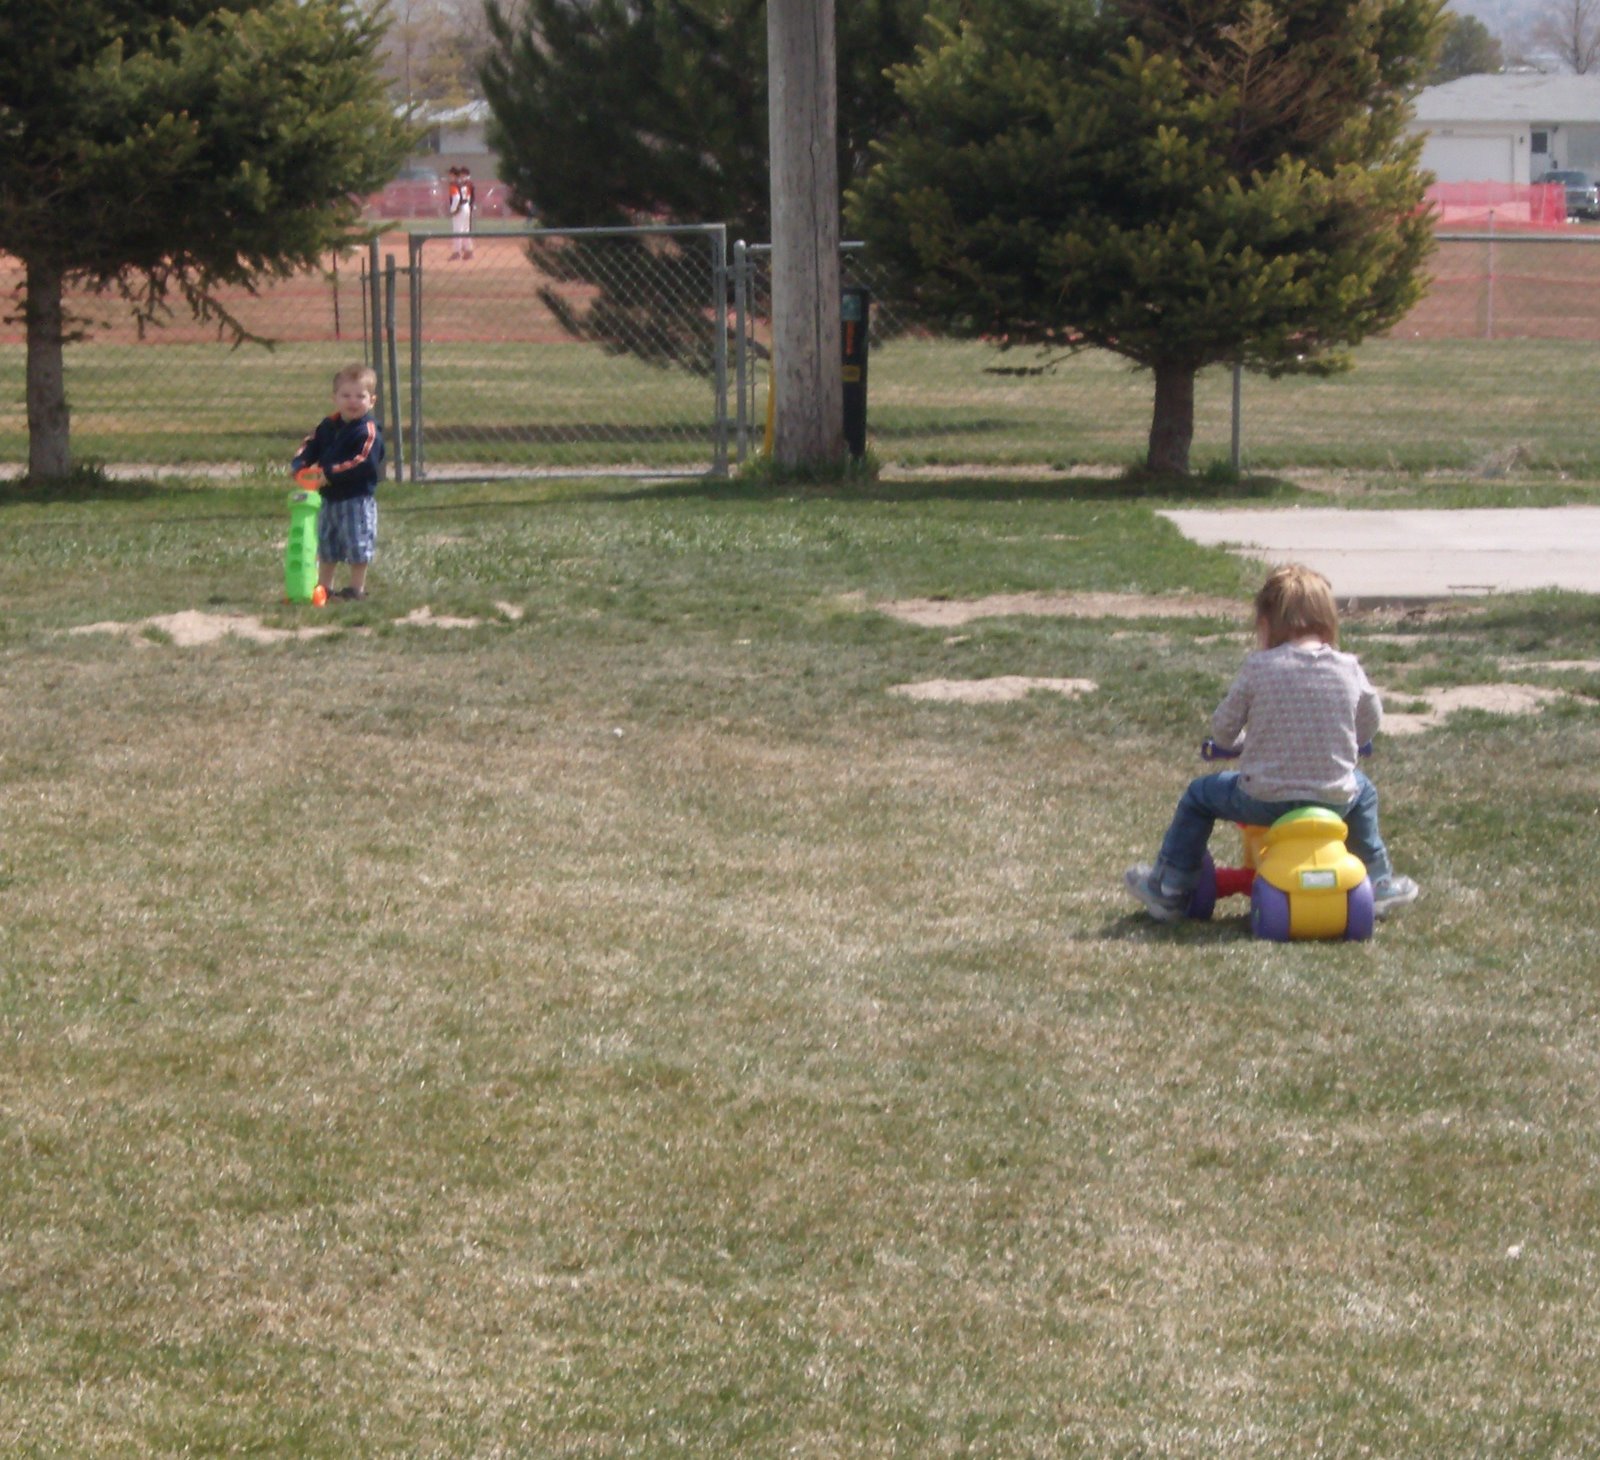 [Carter+and+Halle+playing+in+the+yard.jpg]